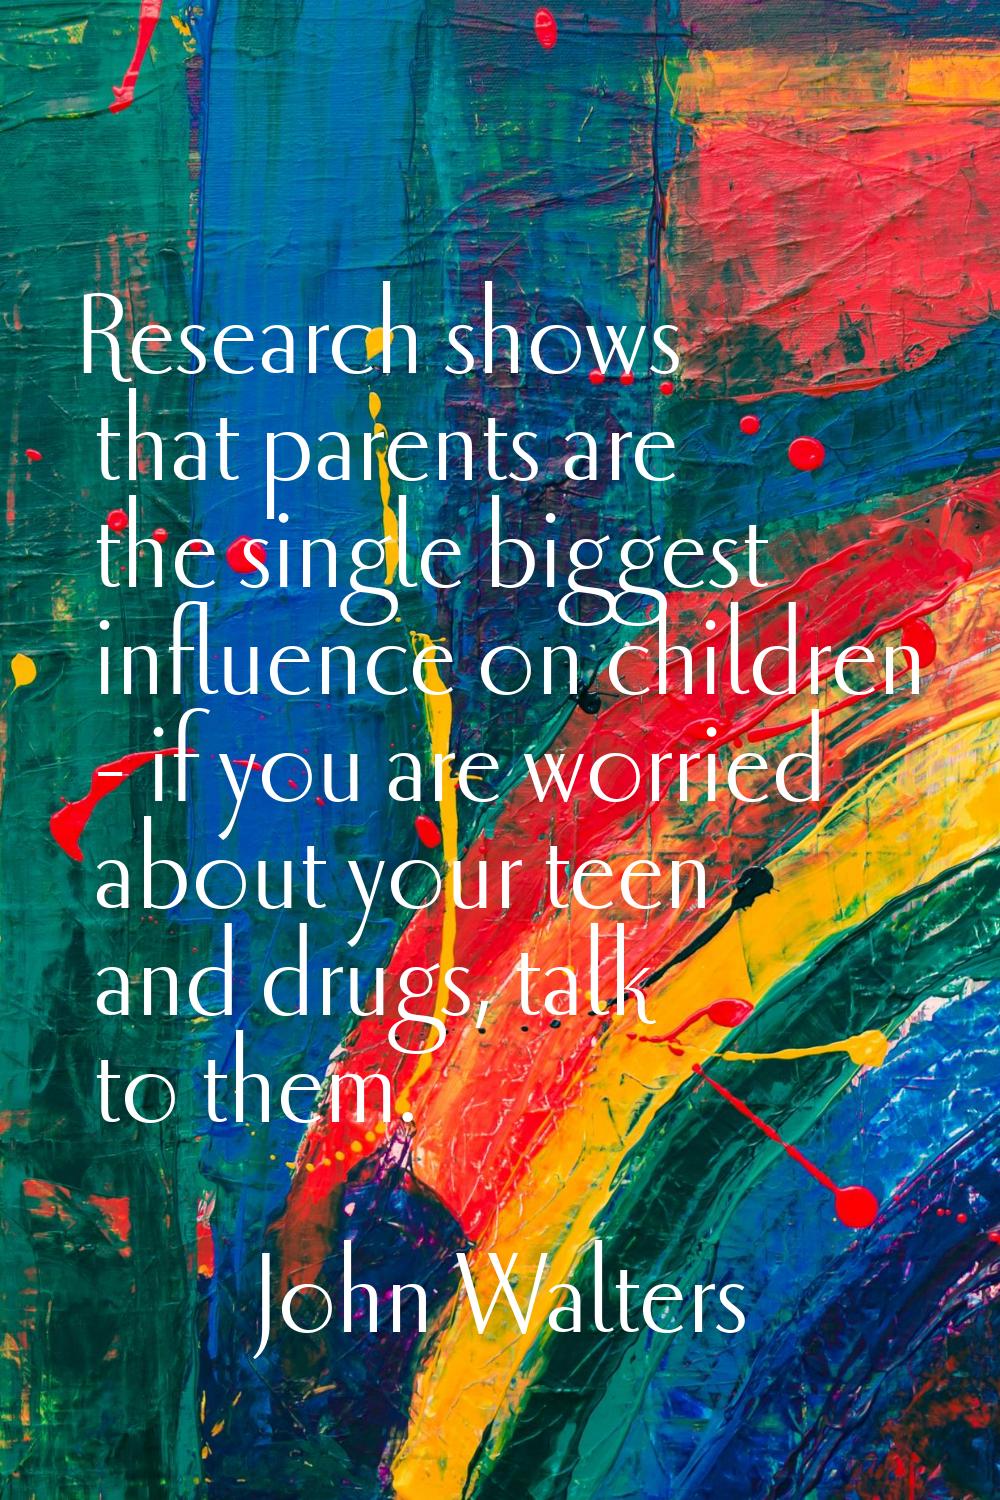 Research shows that parents are the single biggest influence on children - if you are worried about